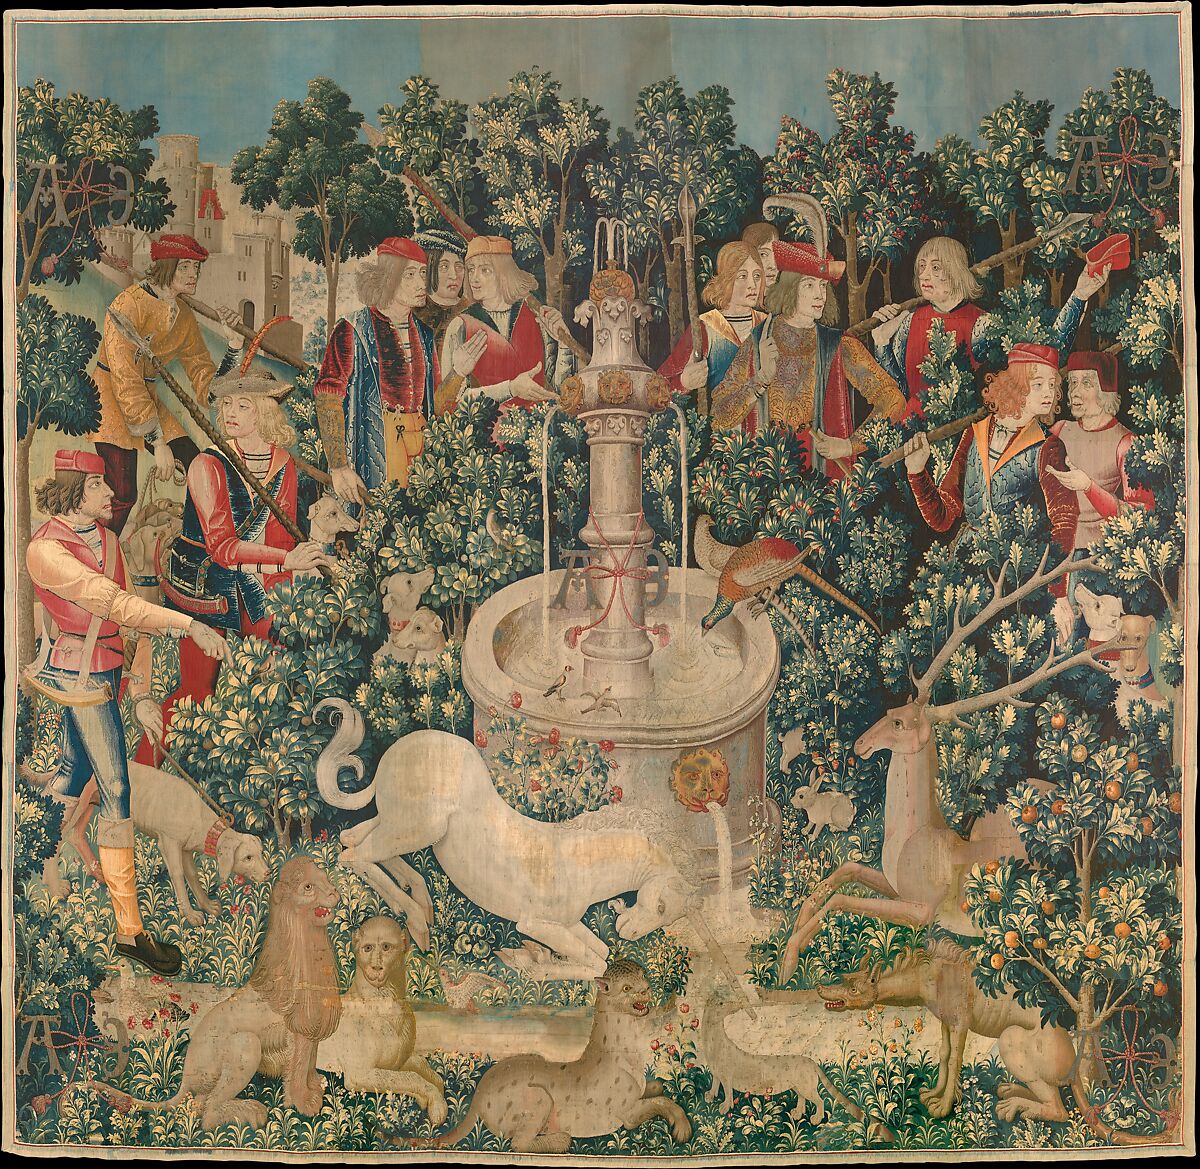 The Unicorn Purifies Water (from the Unicorn Tapestries), Wool warp with wool, silk, silver, and gilt wefts, French (cartoon)/South Netherlandish (woven) 